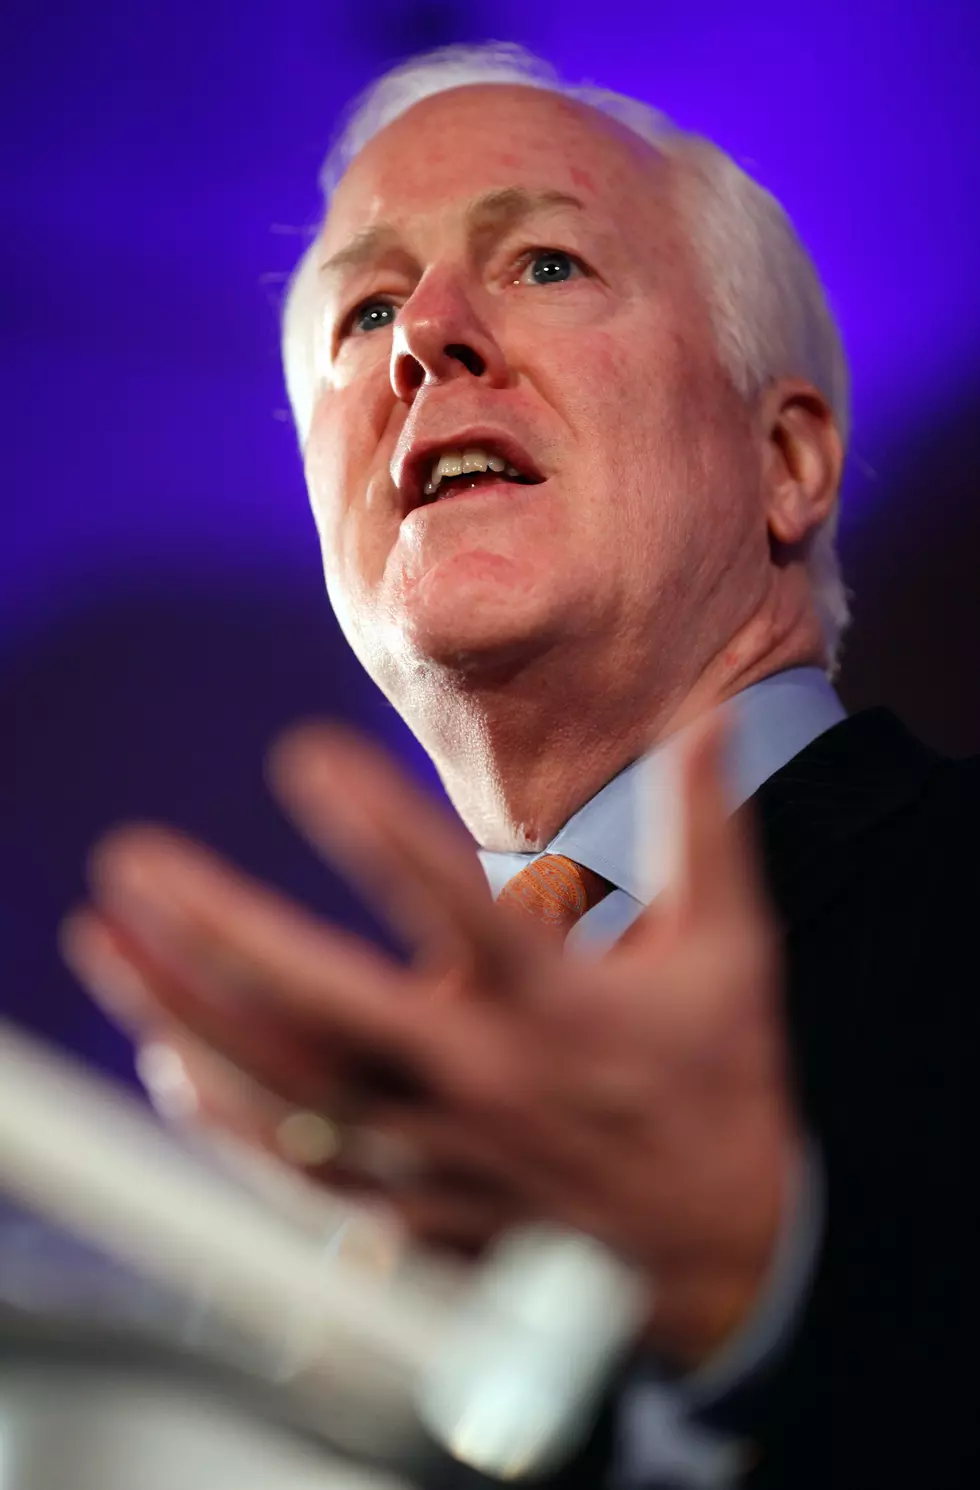 Senator John Cornyn Offers Perspective on Syria and U.S. Reactions